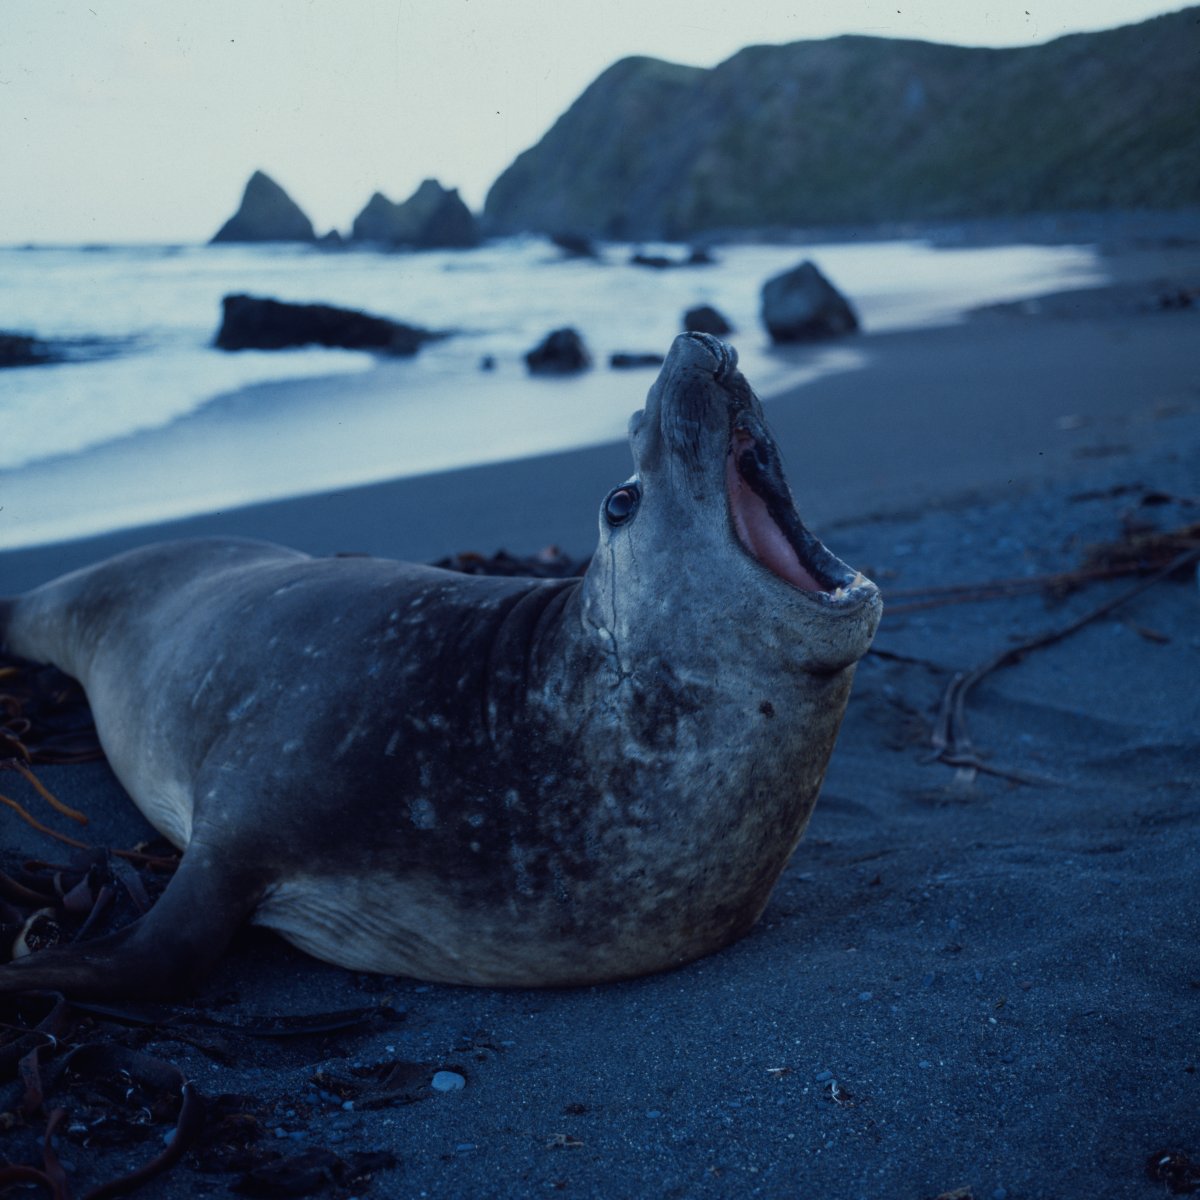 A large grey seal is laying on a dark grey beach. The seal is mid-bellow showing the inside of its mouth. In the background dark cliffs rise out of the water.